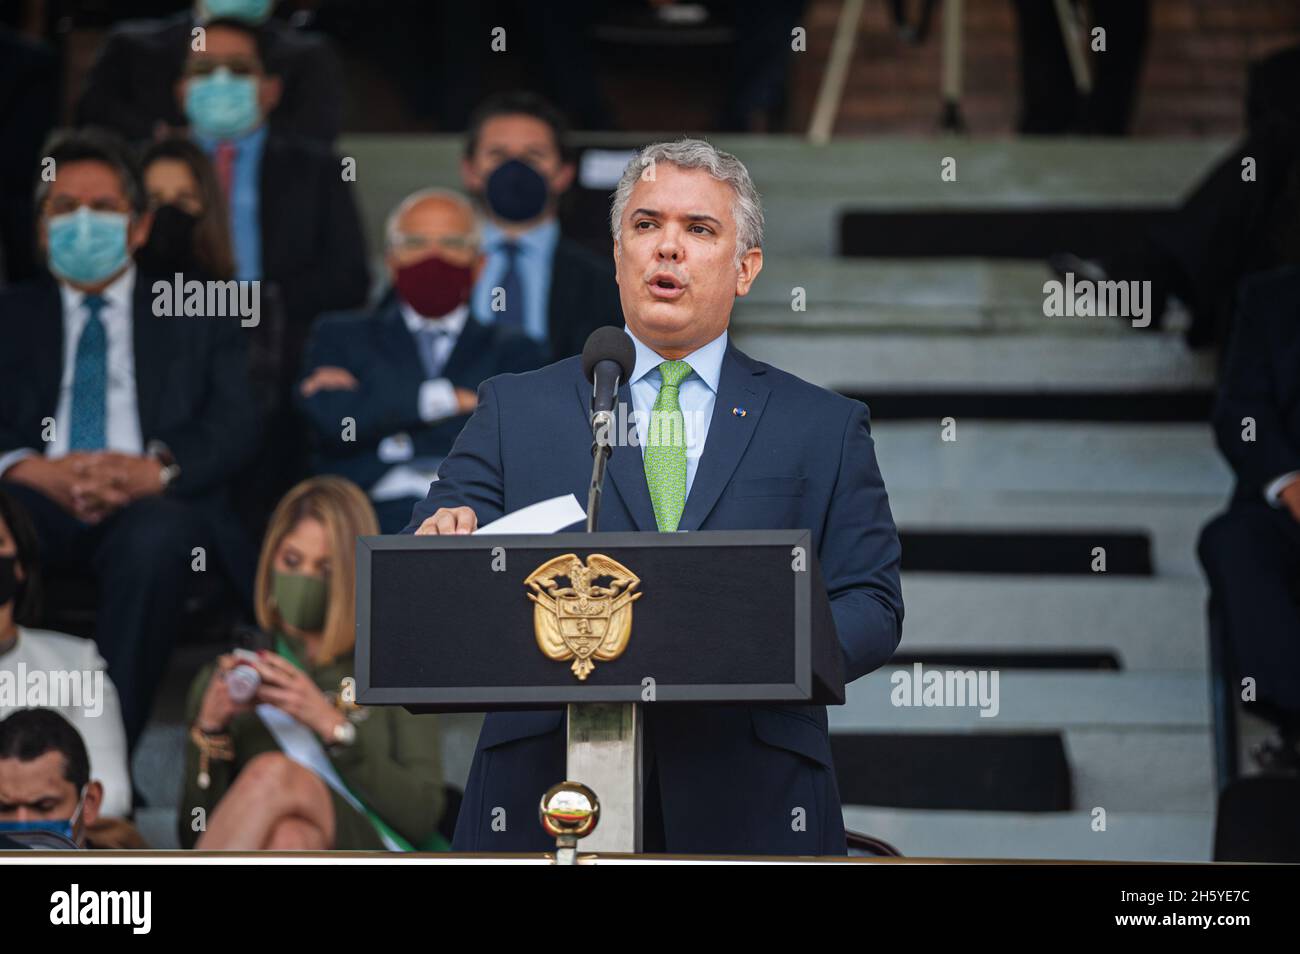 Bogota, Colombia. 11th Nov, 2021. Colombia's president, Ivan Duque Marquez gives a speech during an event were Colombia's president Ivan Duque Marquez and Colombia's Minister of Defense Diego Molano in conmmemoration of the 130 anniversary of Colombia's National Police and the promotion to officers to more than a 100 police members, in Bogota, Colombia on November 11, 2021. Credit: Long Visual Press/Alamy Live News Stock Photo